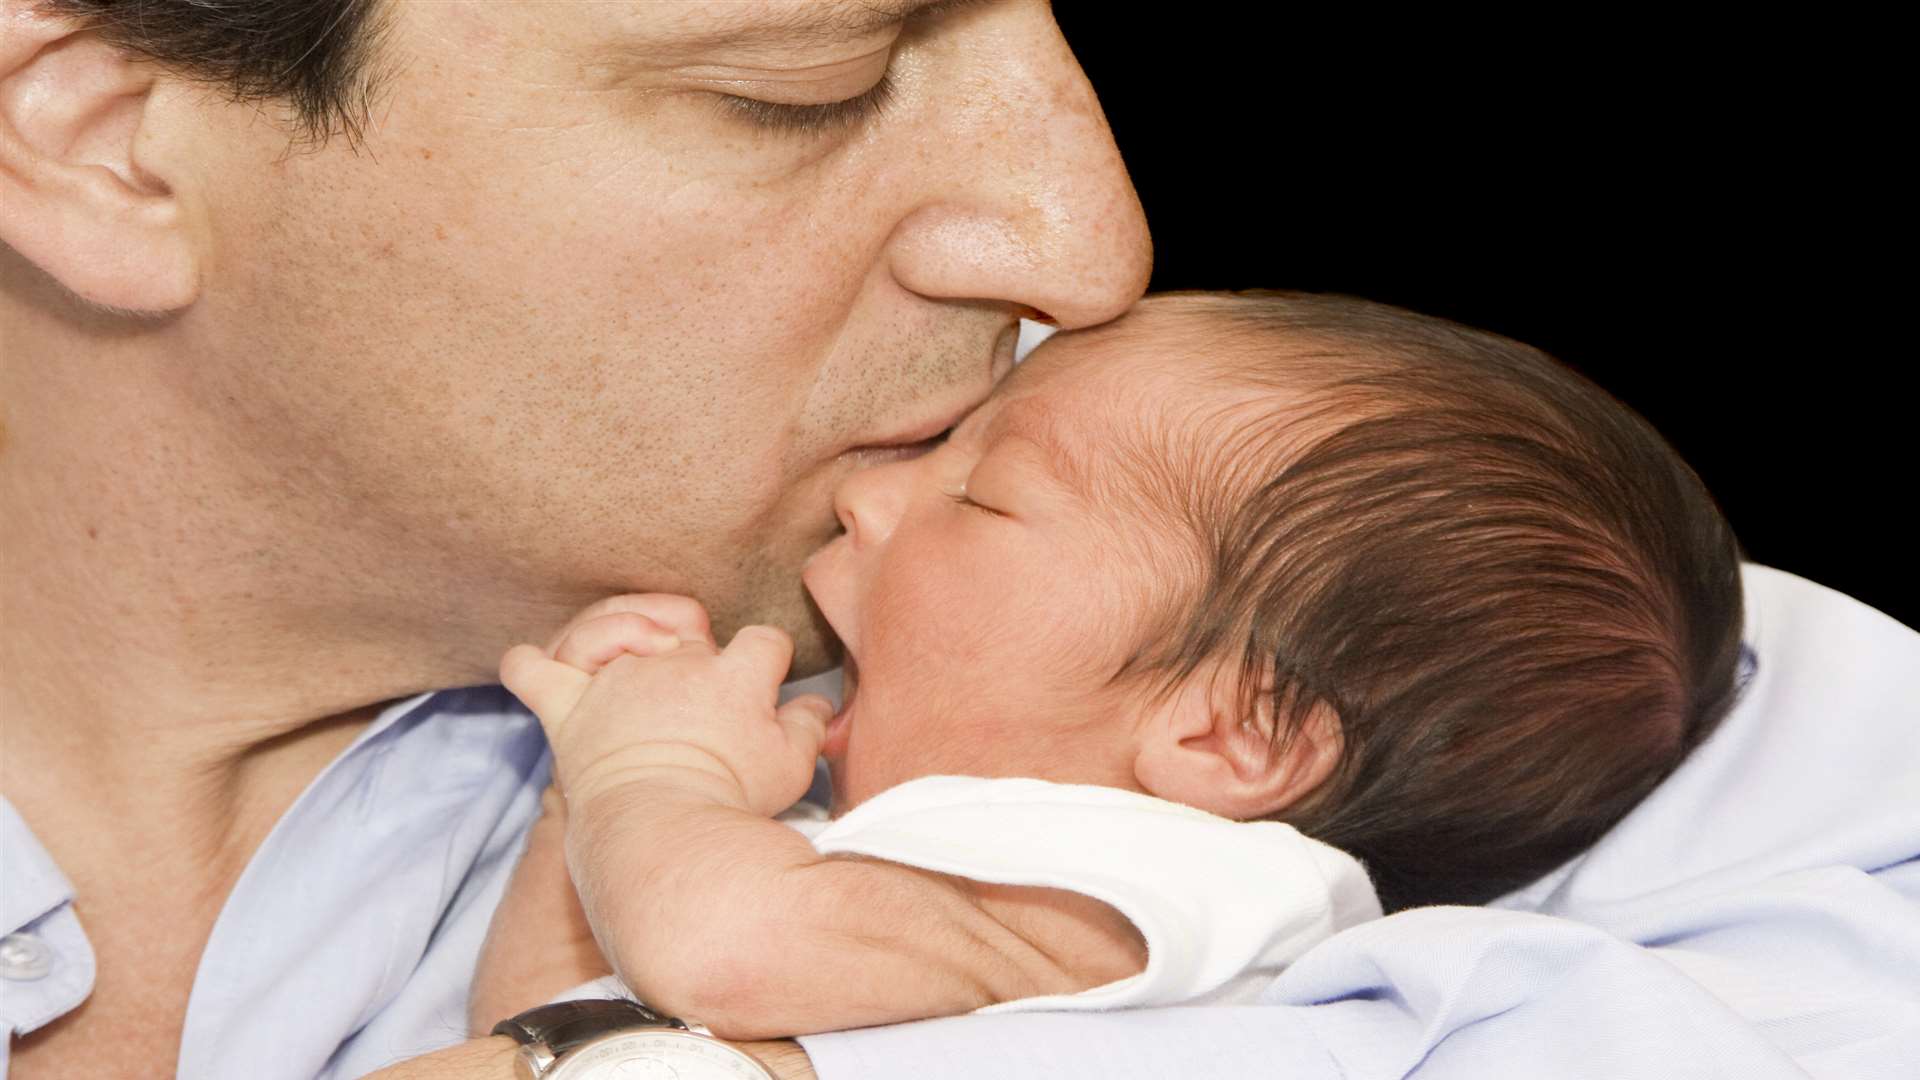 Father and newborn baby. Picture: Thinkstock Image Library